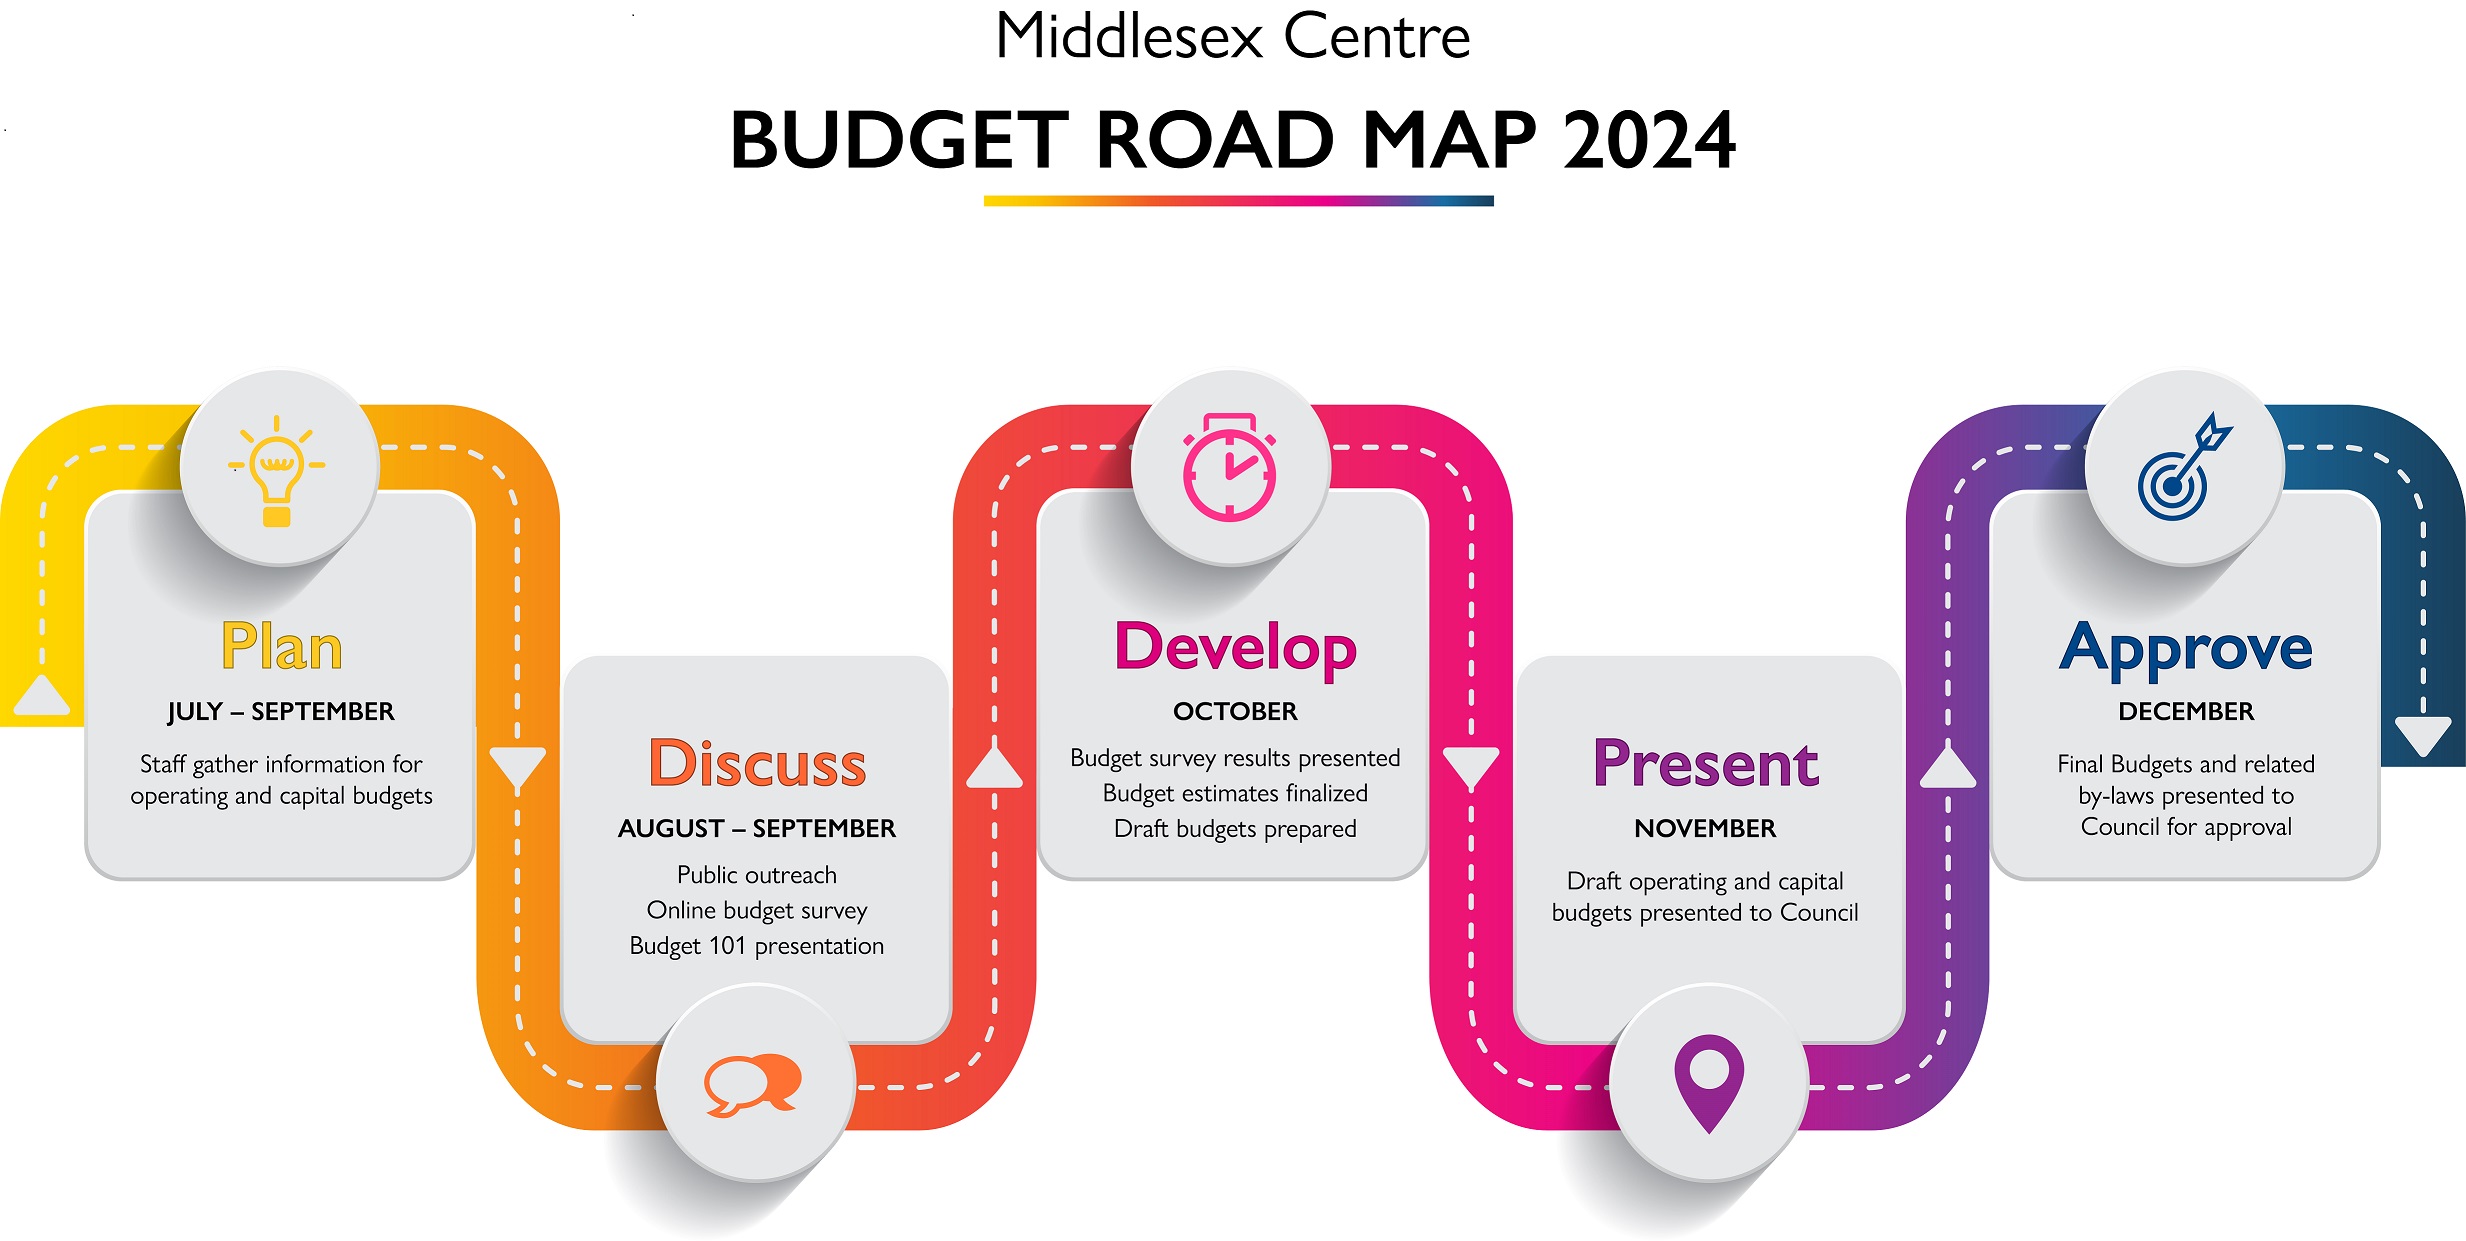 Middlesex Centre Budget Road Map 2024